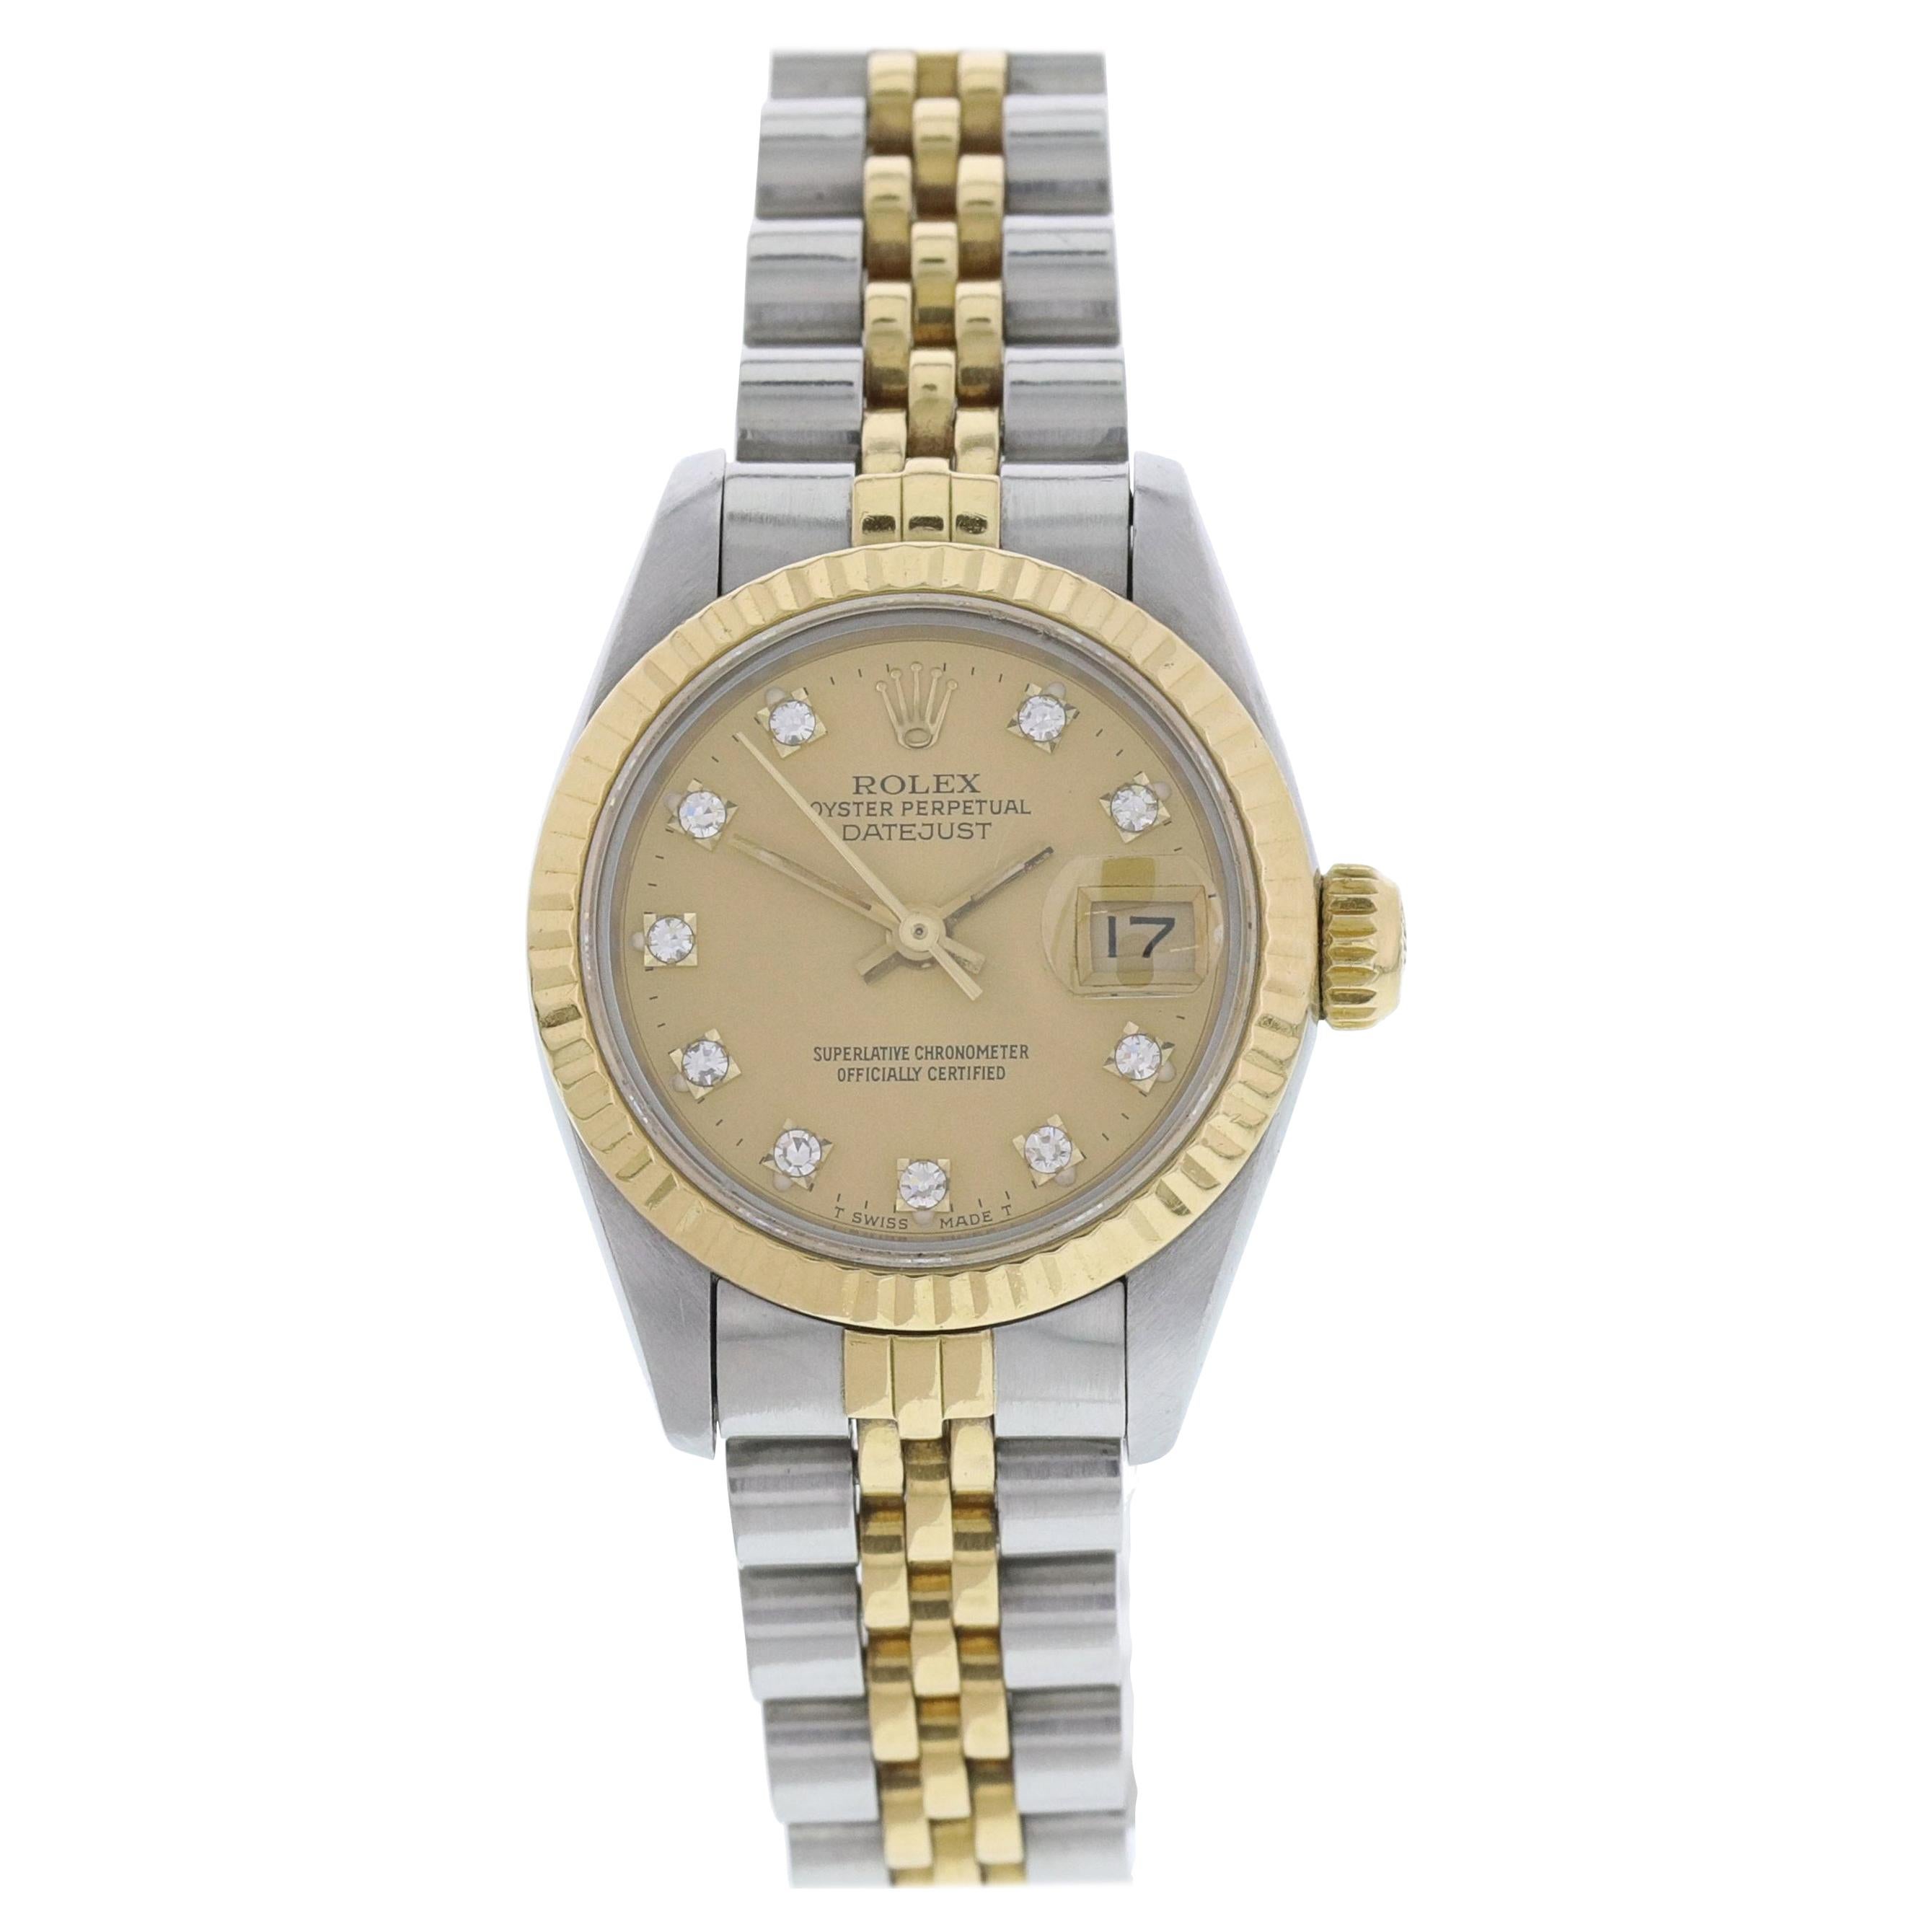 Rolex Oyster Perpetual Datejust 69173 Diamond Dial Ladies Watch